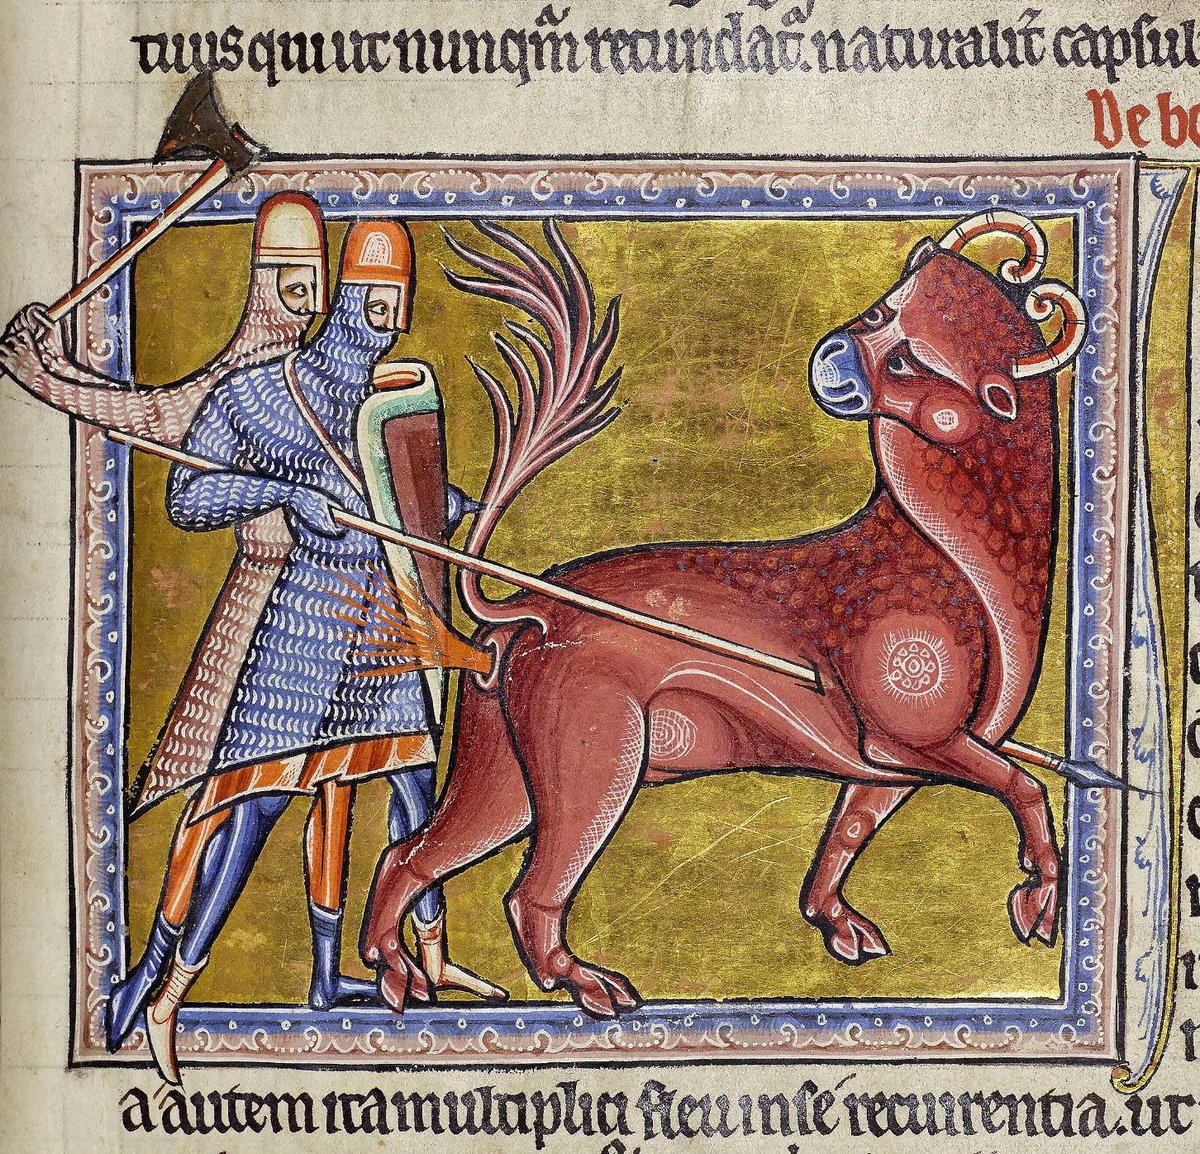 Some butts shoot fire(Literally. The mythical Bonnacon was said to shoot fiery poop at attackers)(Aberdeen University Library, MS 24, f. 12r) #MedievalTwitter